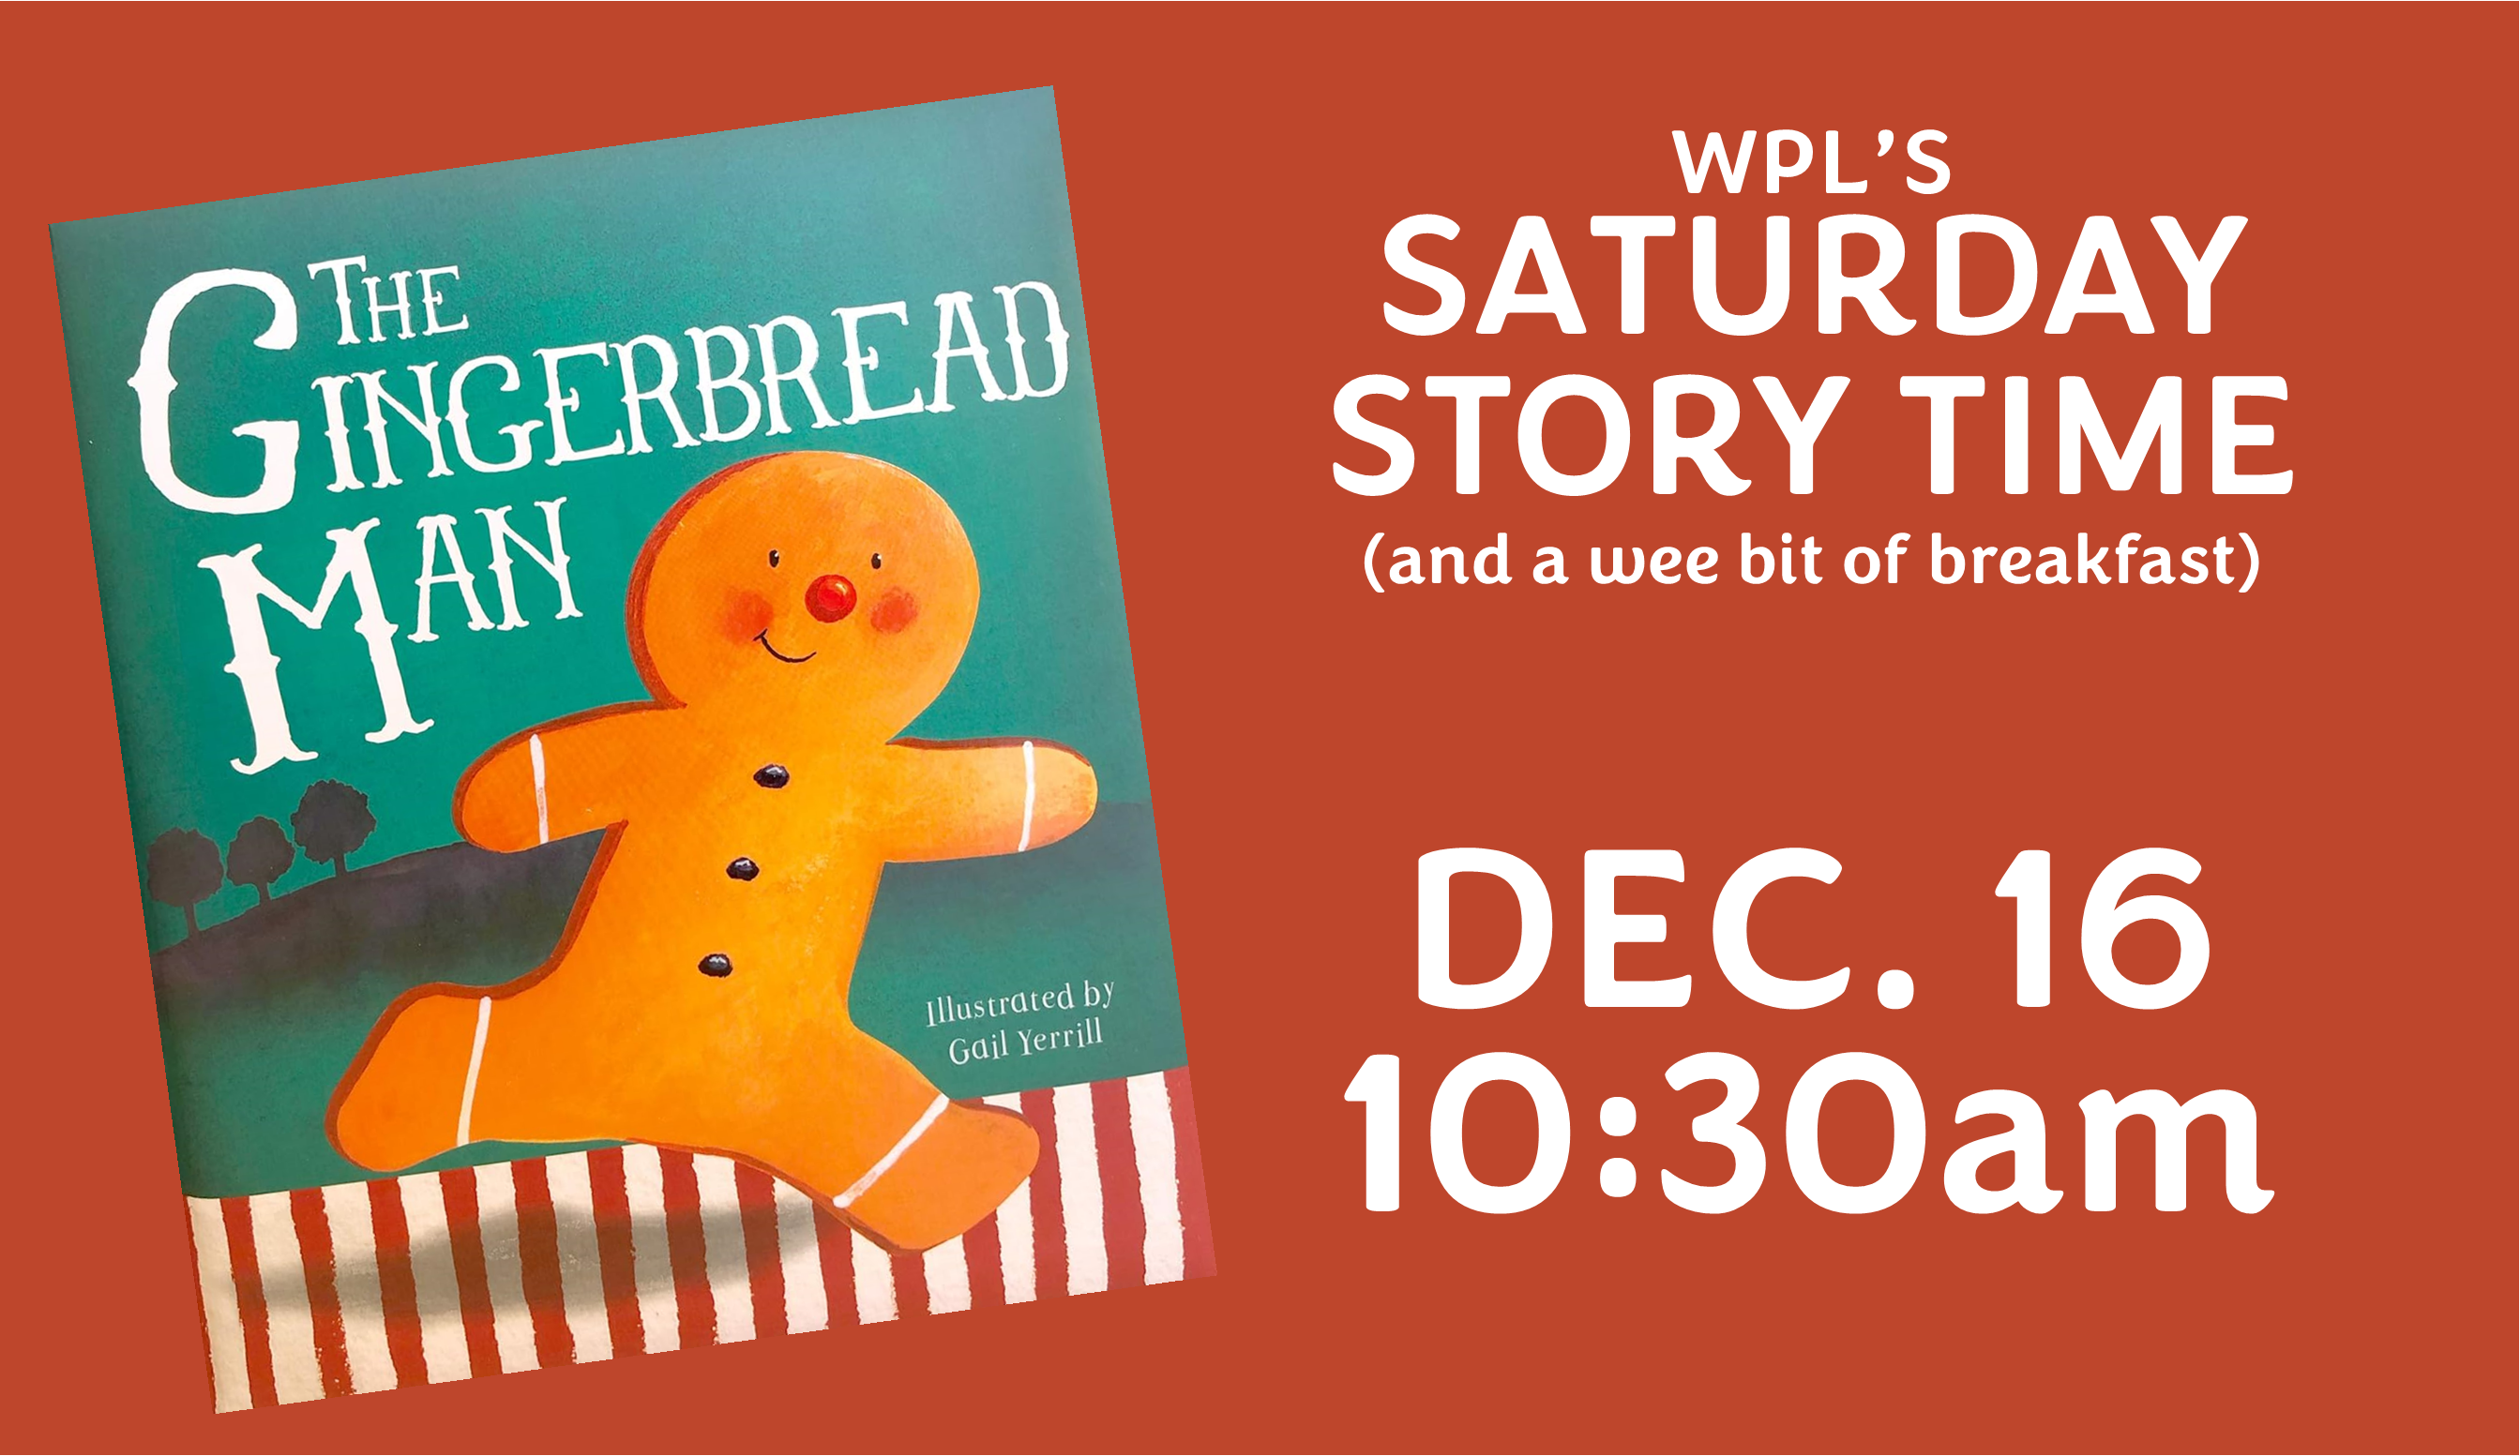 Image is cover of the book, The Gingerbread Man by Gail Yerrill